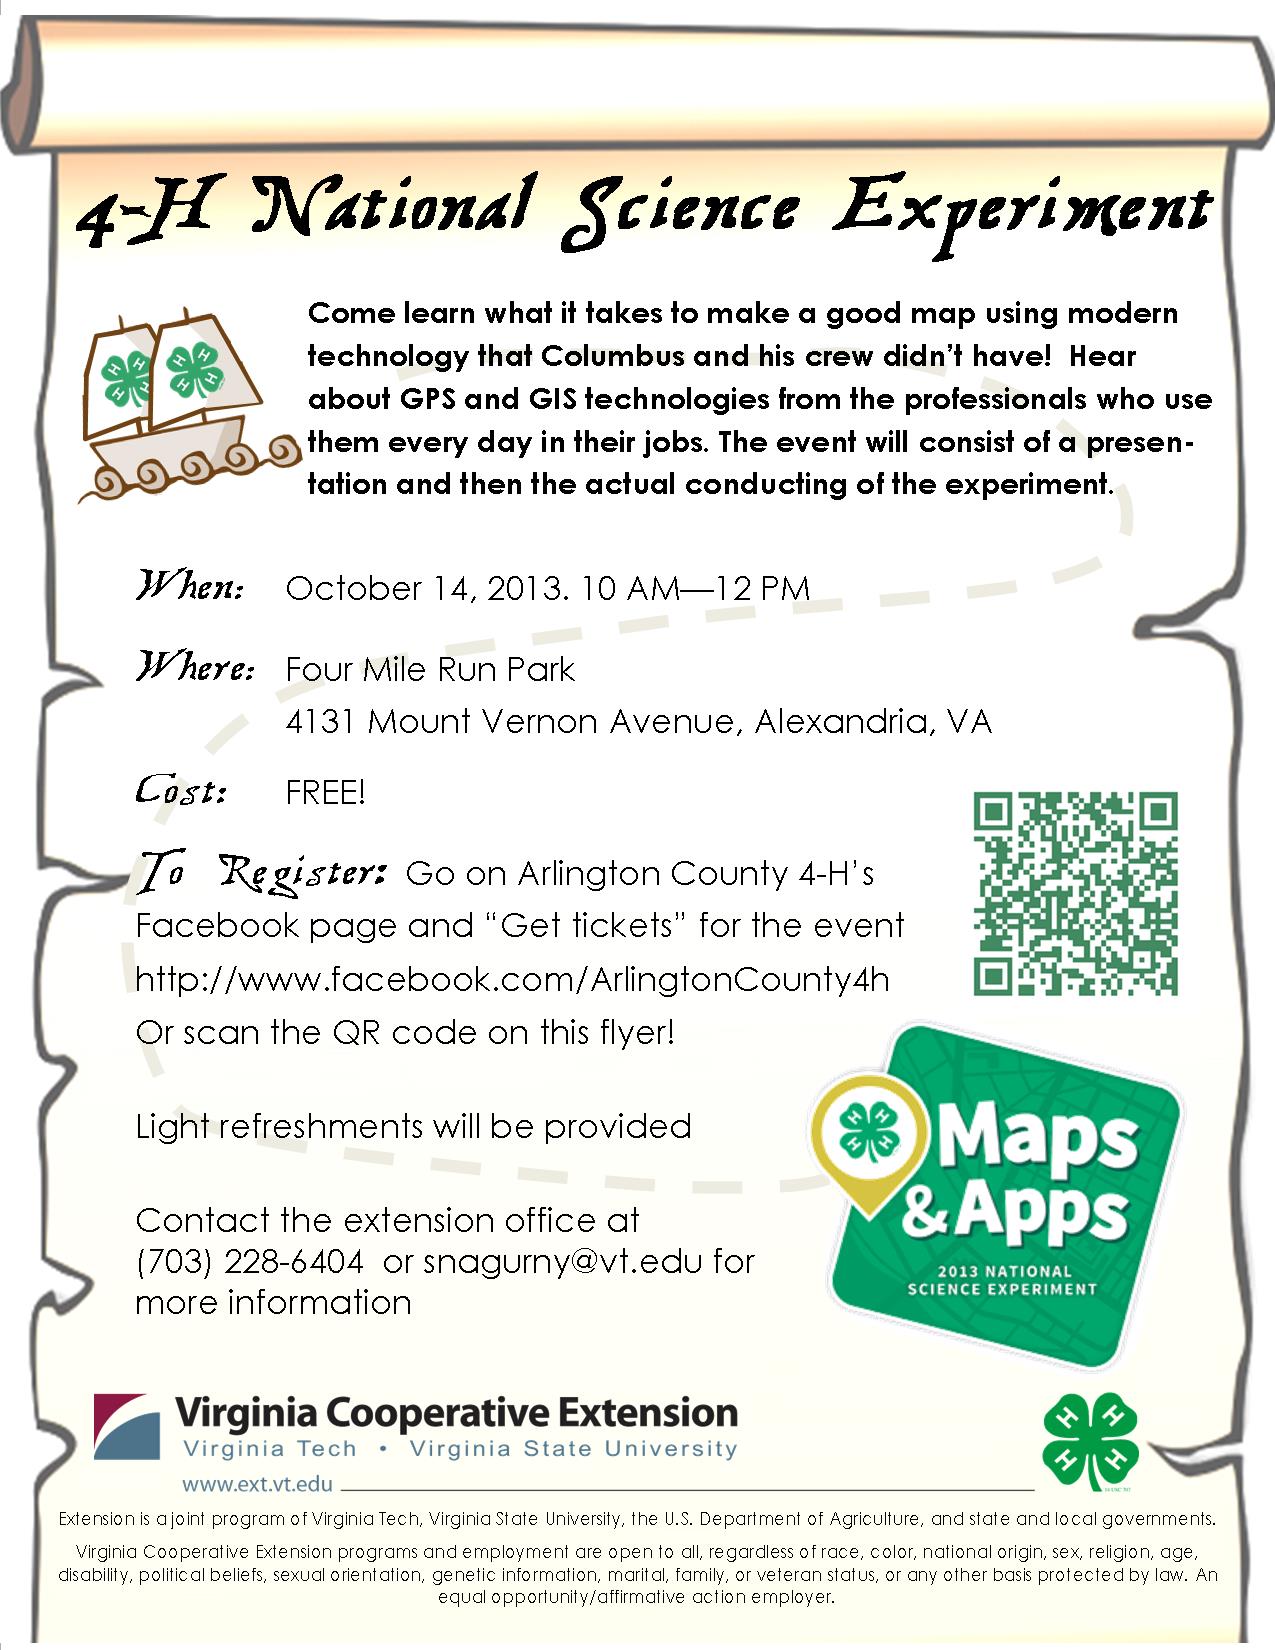 4-H National Youth Science Experiment! Arlington and Alexandria Virginia Cooperative Extension pic